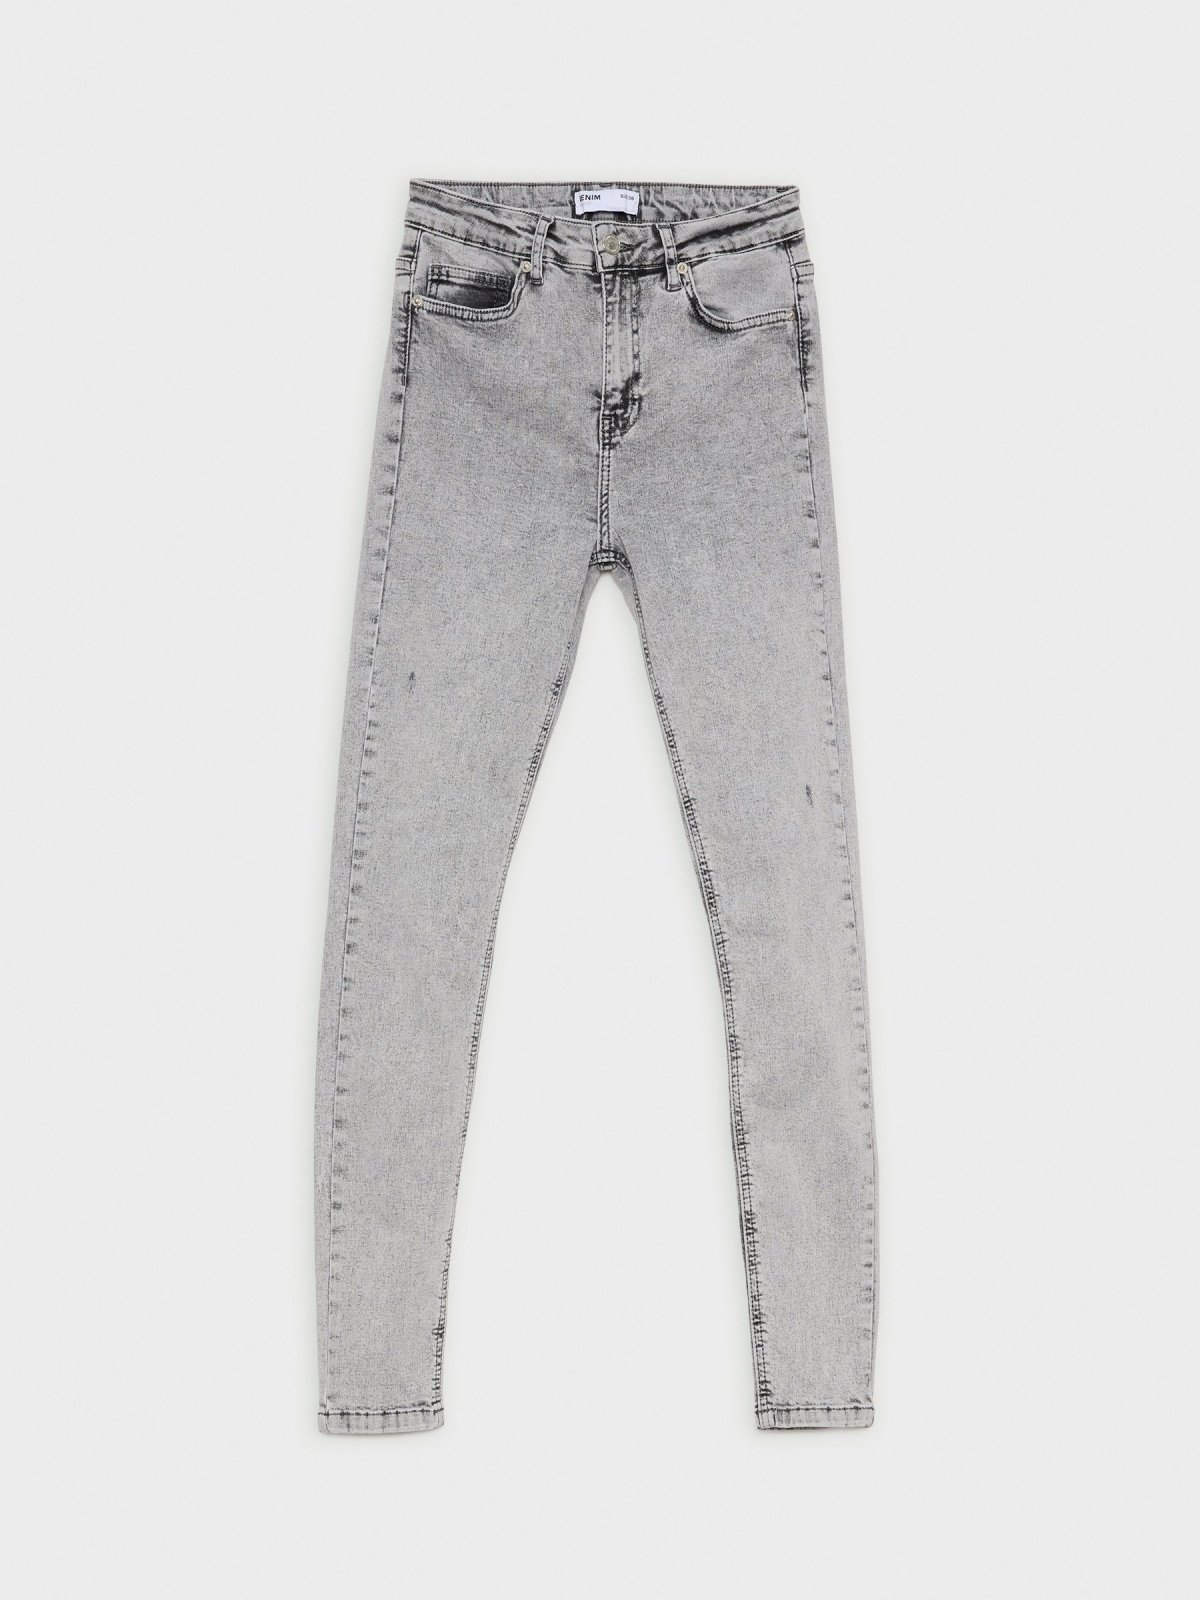  Washed gray skinny jeans grey